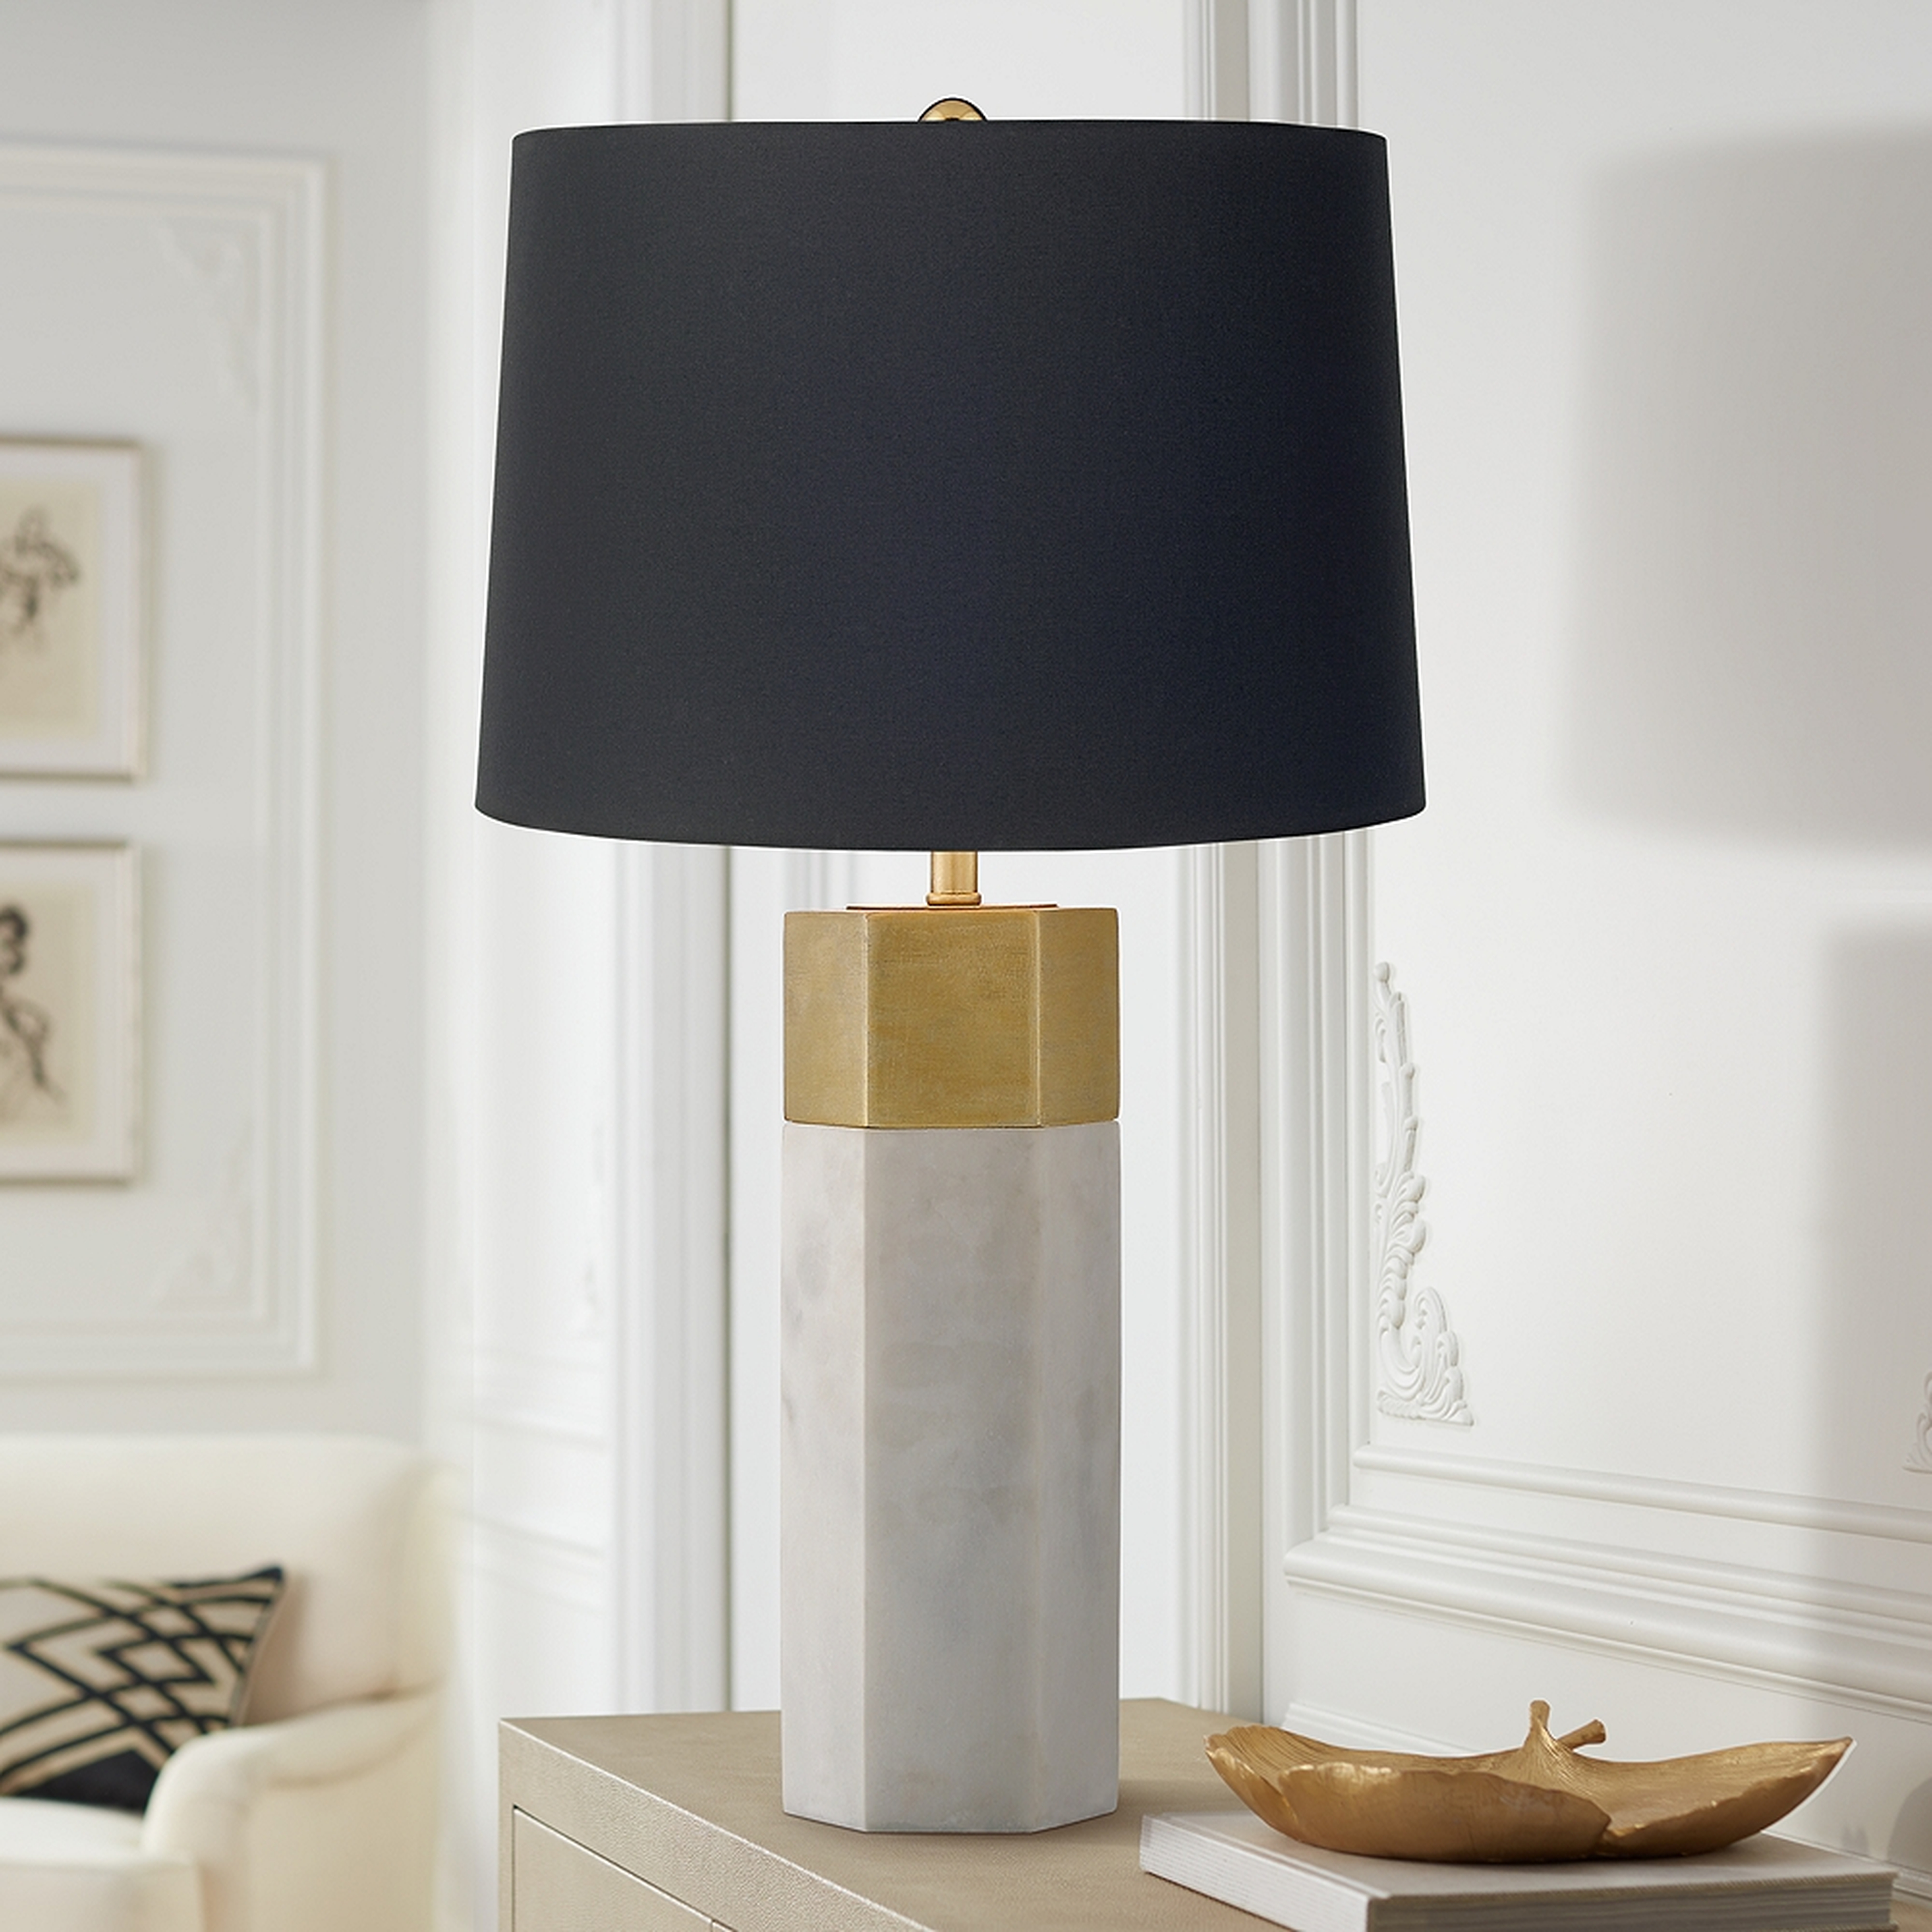 Possini Euro Leala Luxe Modern Table Lamp with Black Shade - Style # 91T61 - Lamps Plus